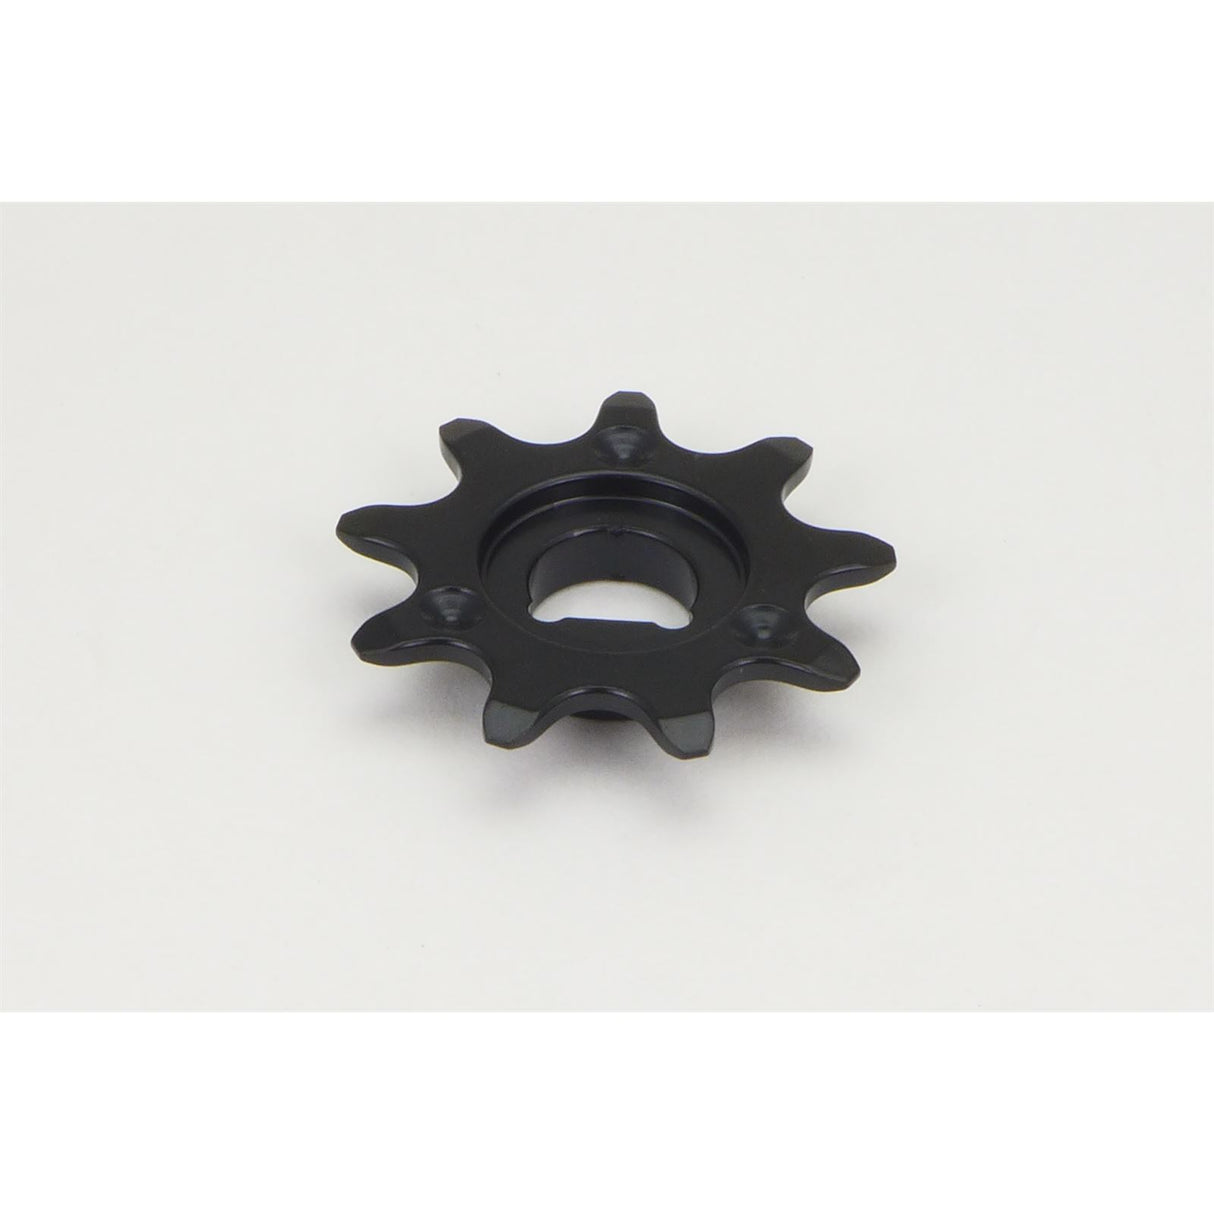 STACYC REPLACEMENT 9T SPROCKET - 12 EDRIVE